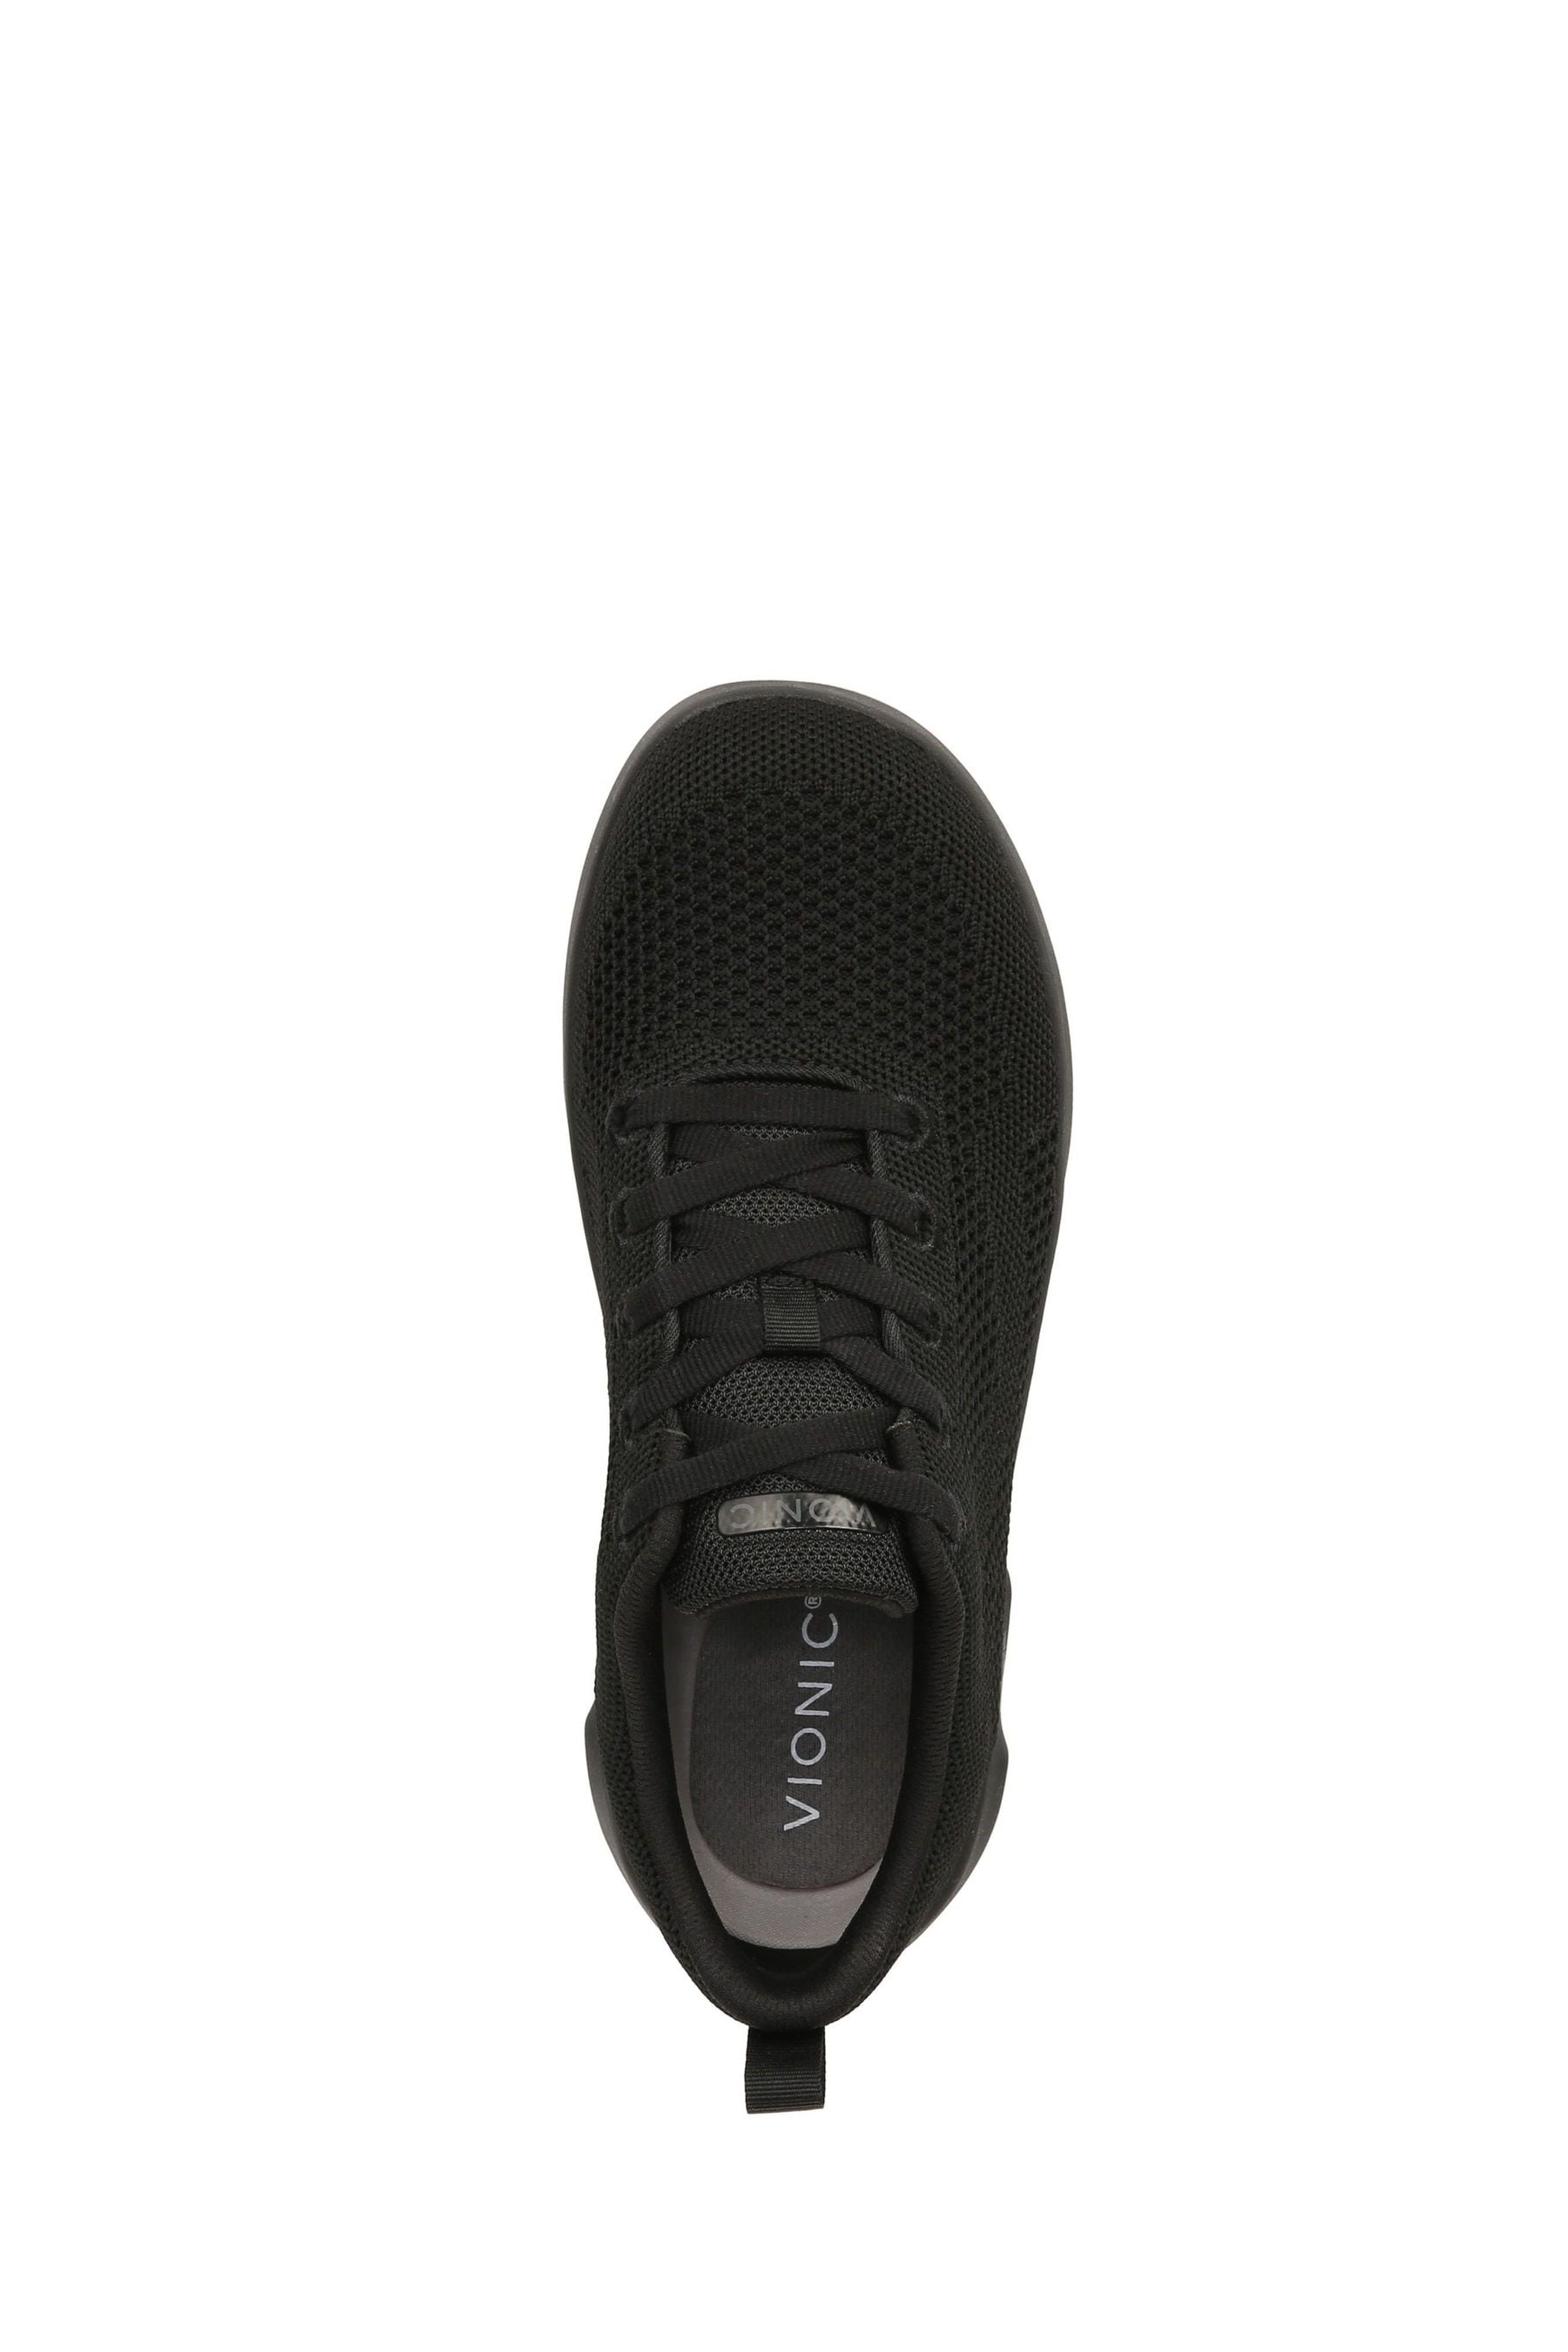 Buy Vionic Arrival Black Trainers from the Next UK online shop